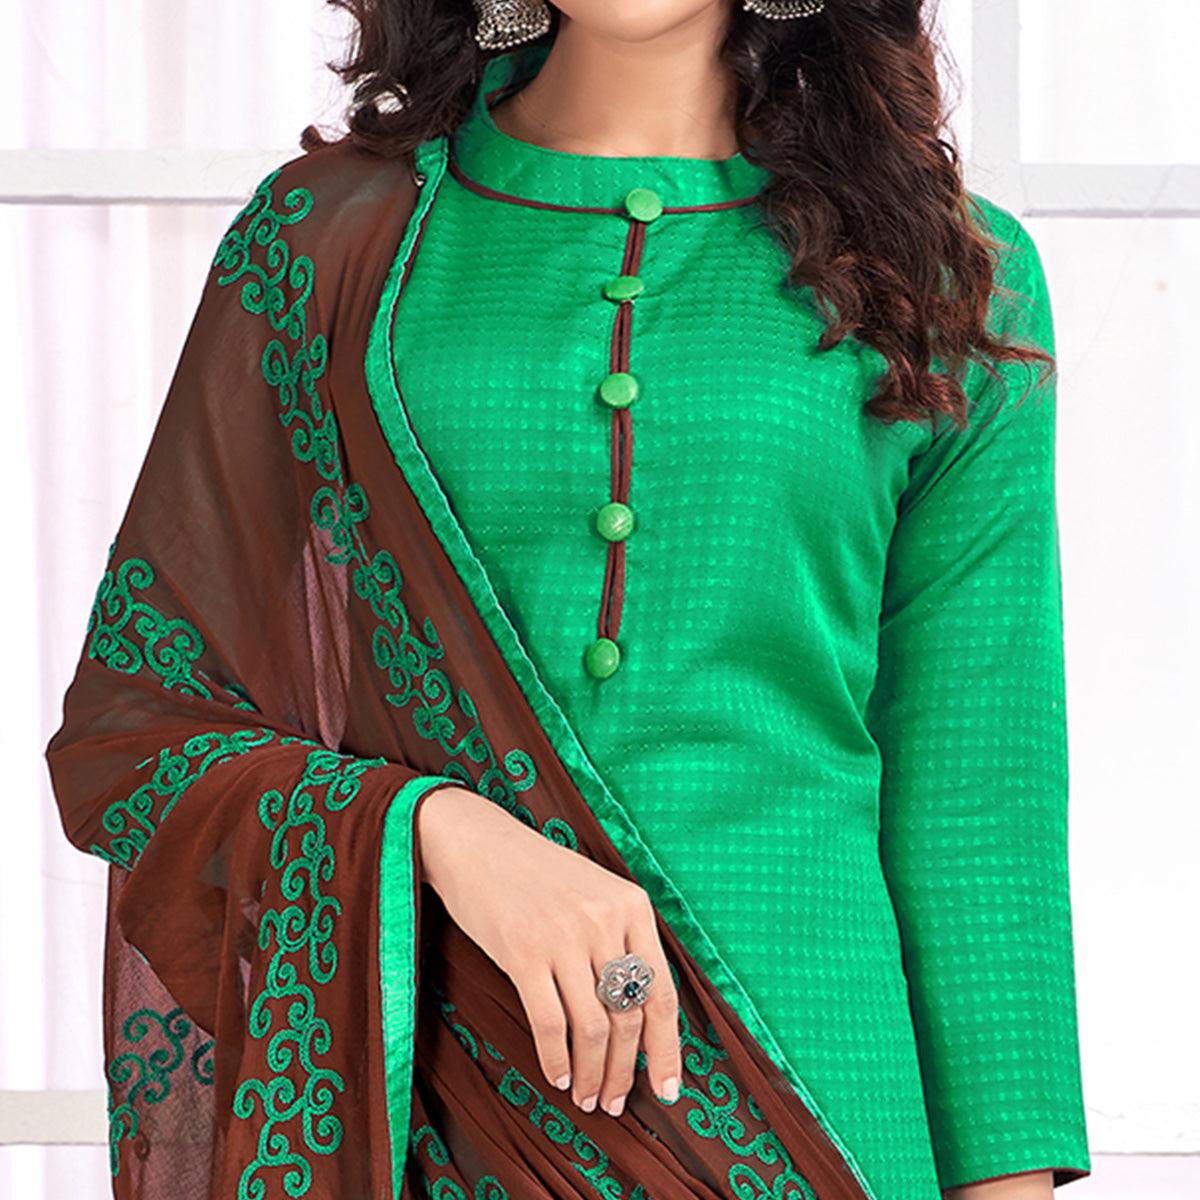 Fab Green Colored Partywear Embroidered Cotton Suit - Peachmode